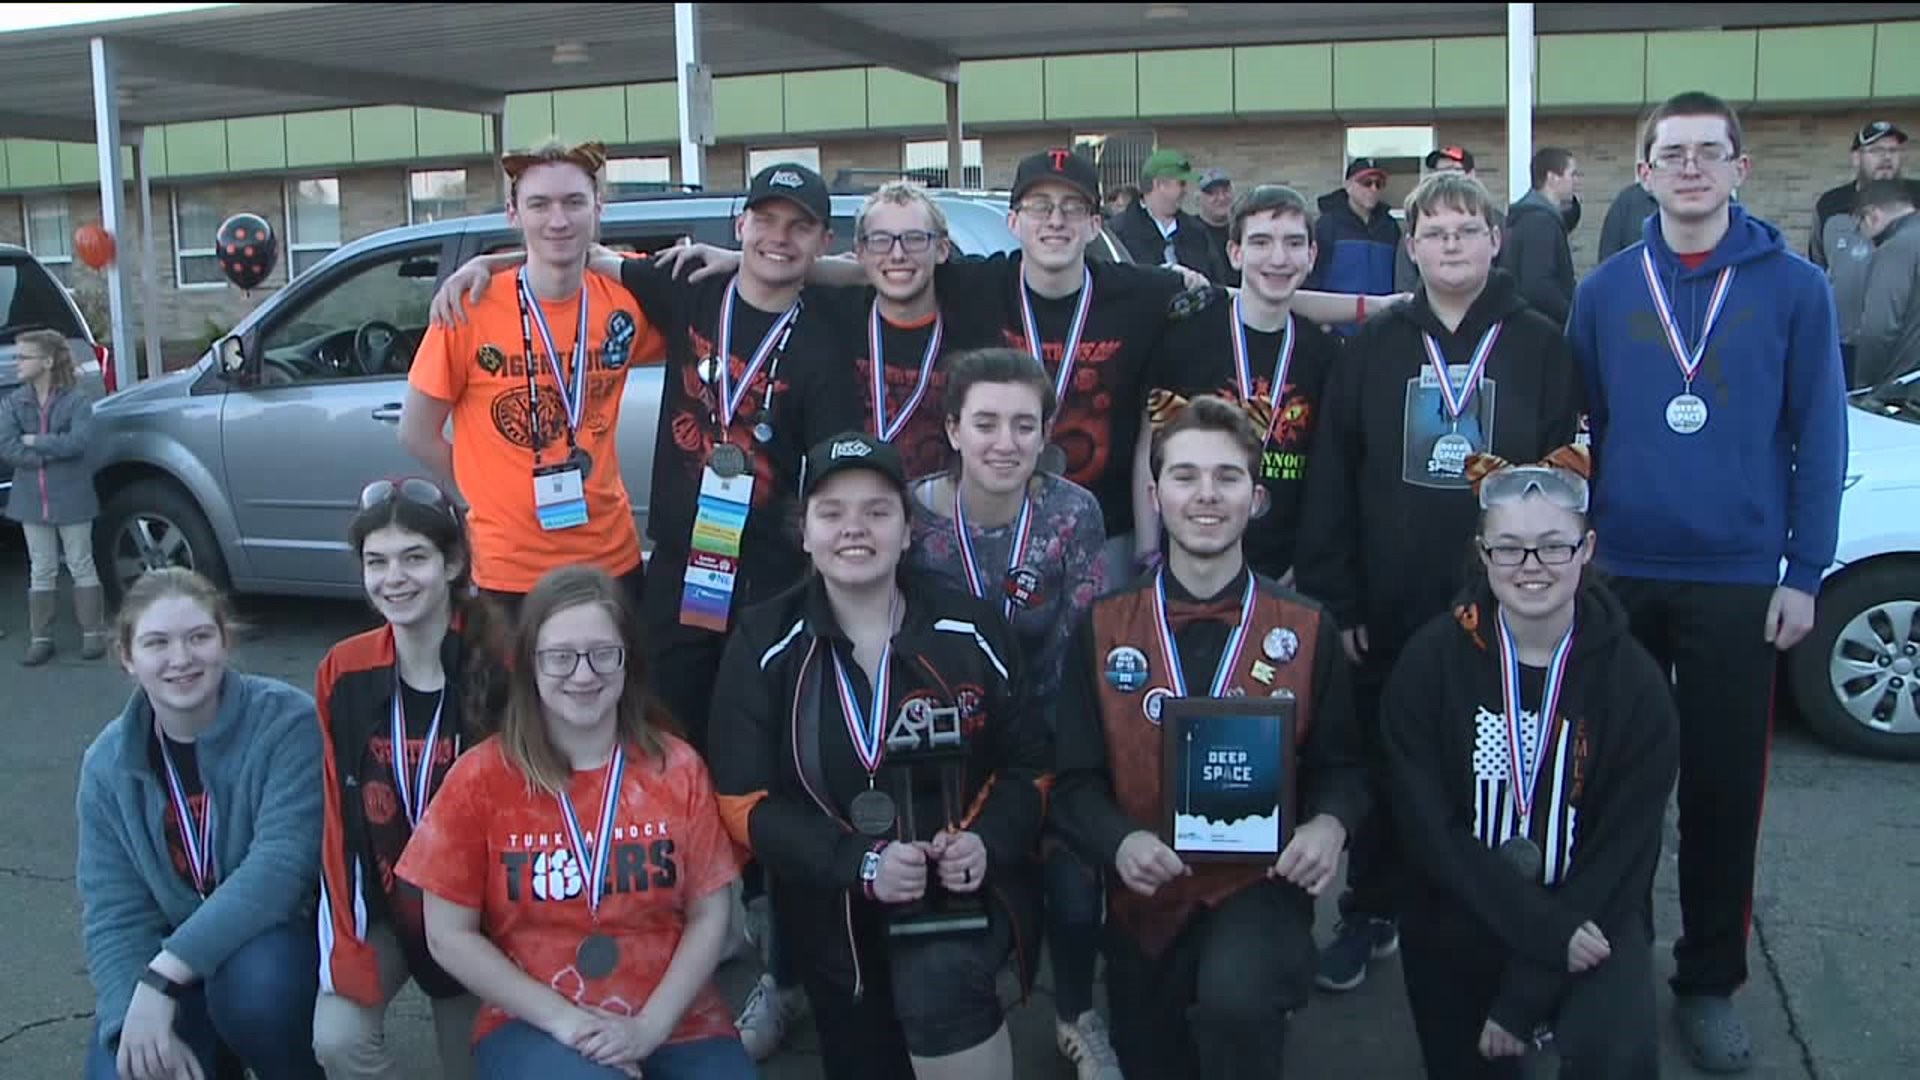 Tunkhannock Area High School Robotics Team Finishes Second in Division in World Competition